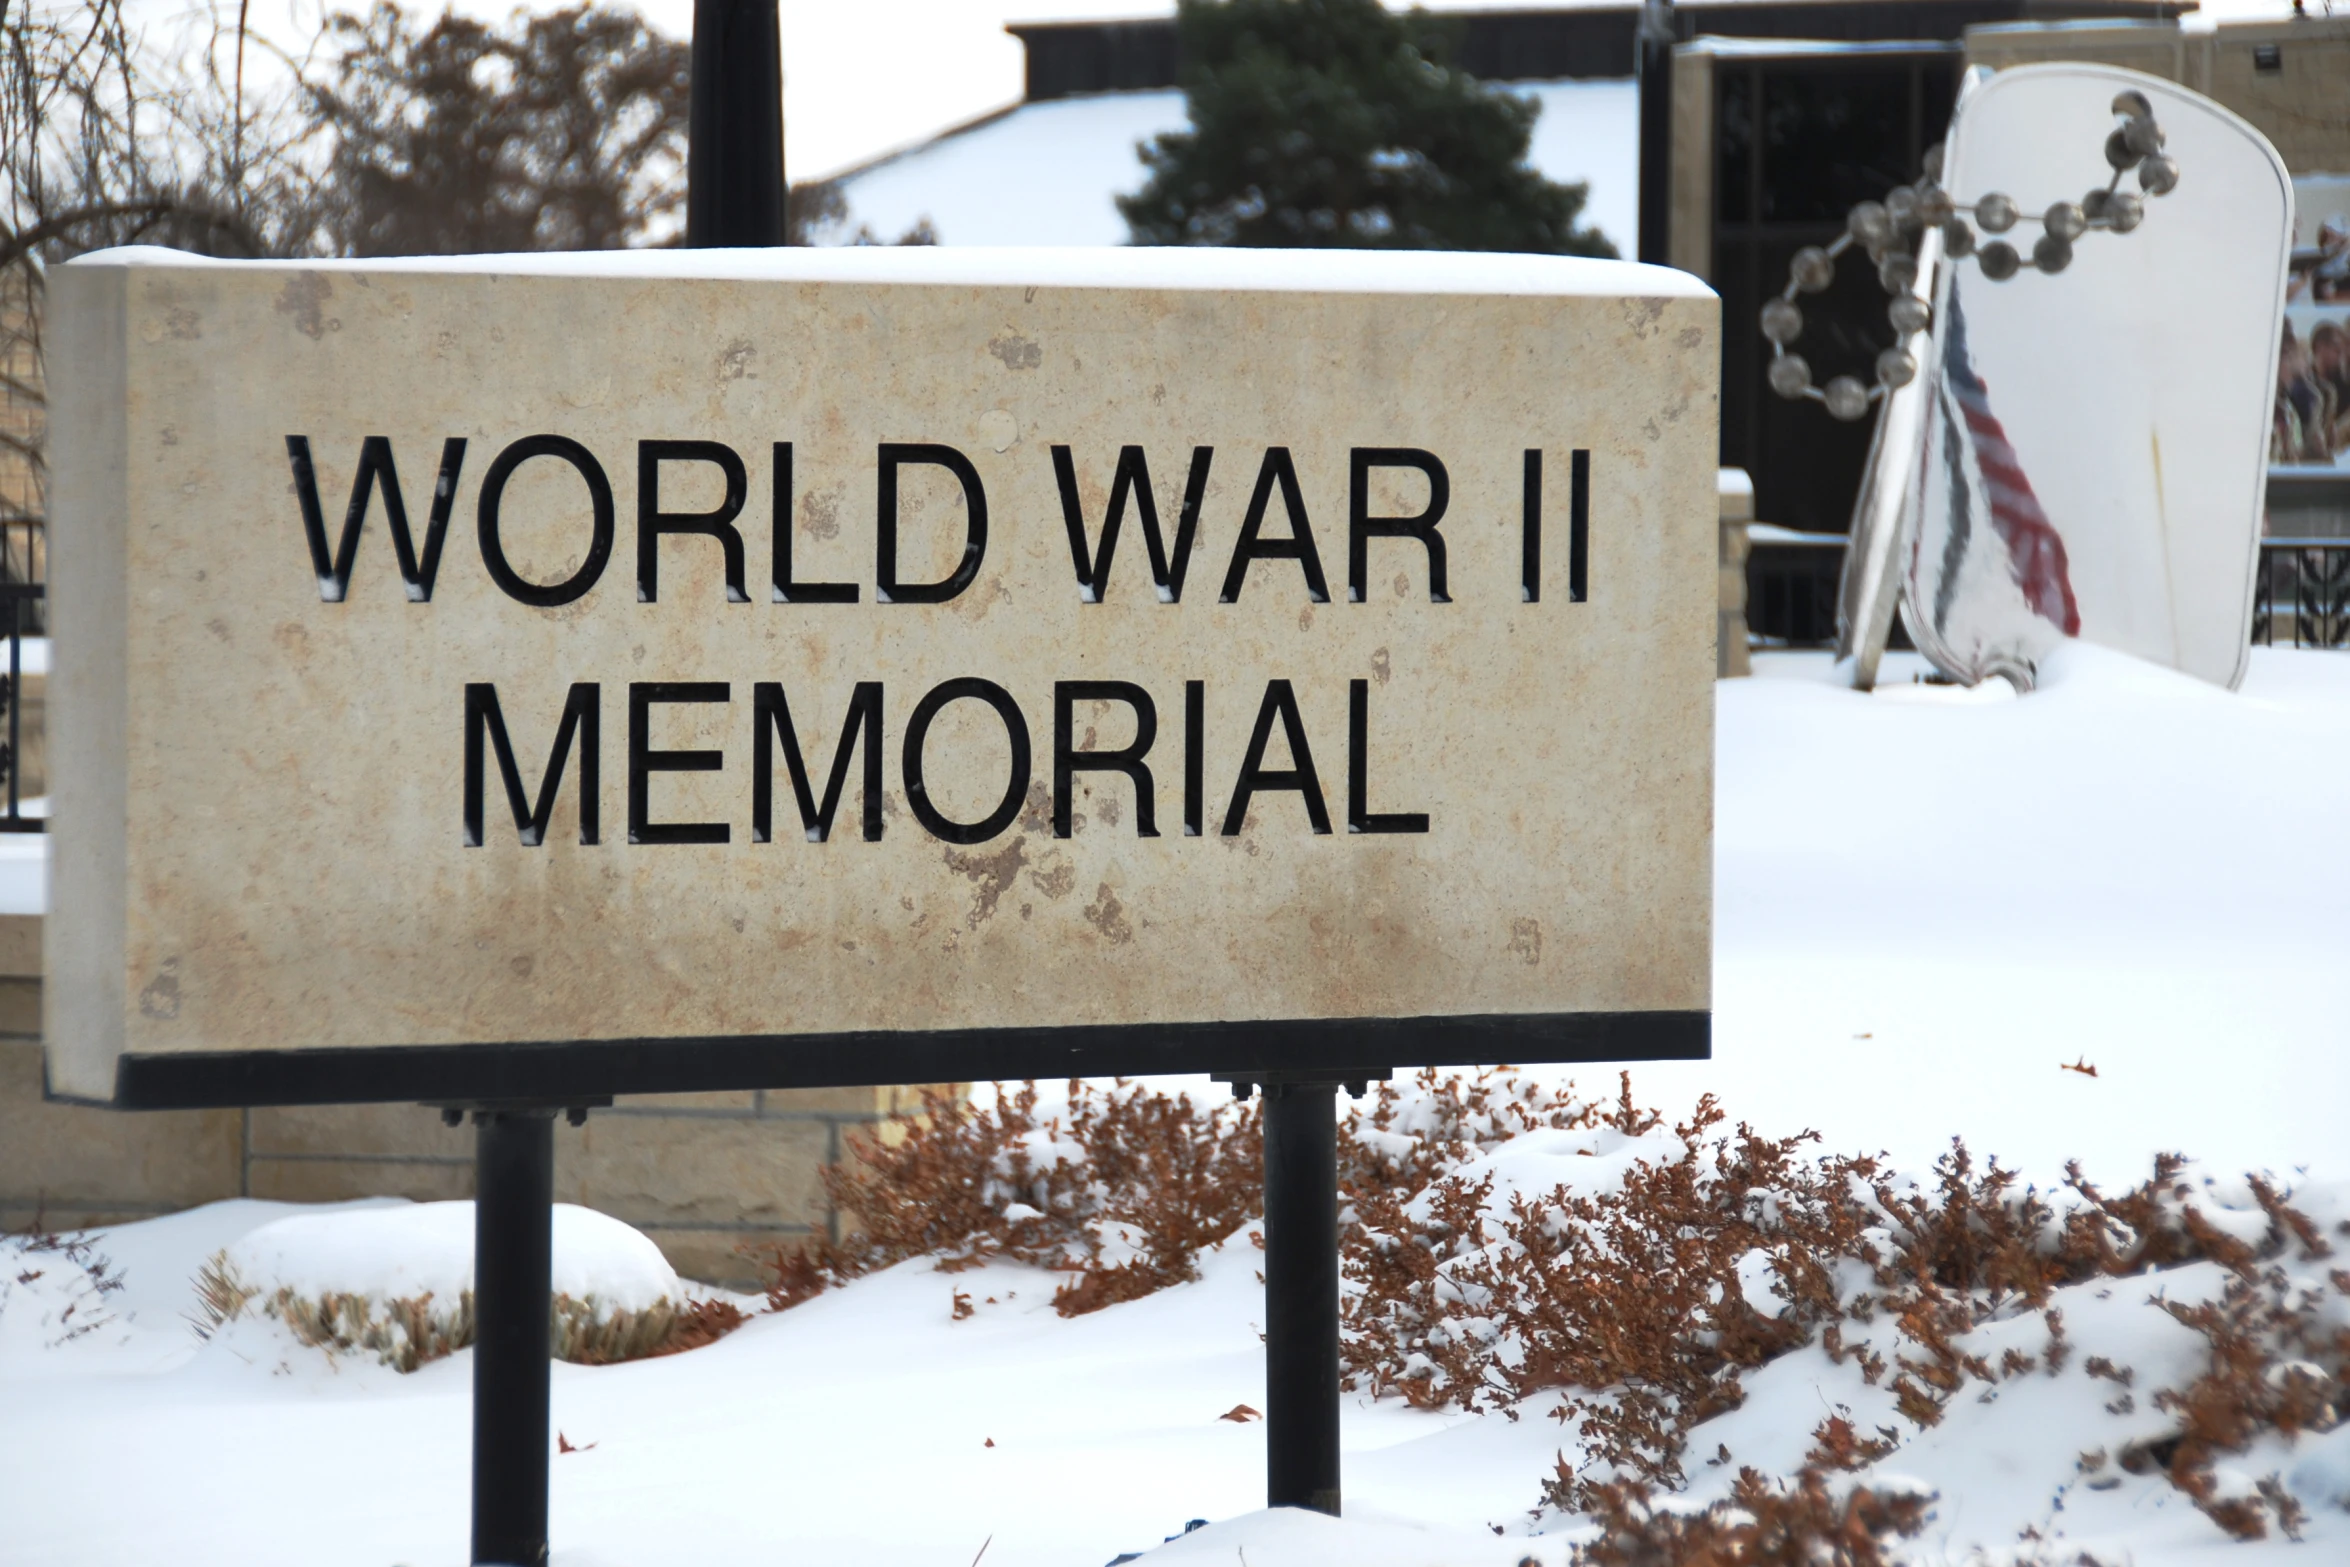 a war memorial sign in the snow by buildings